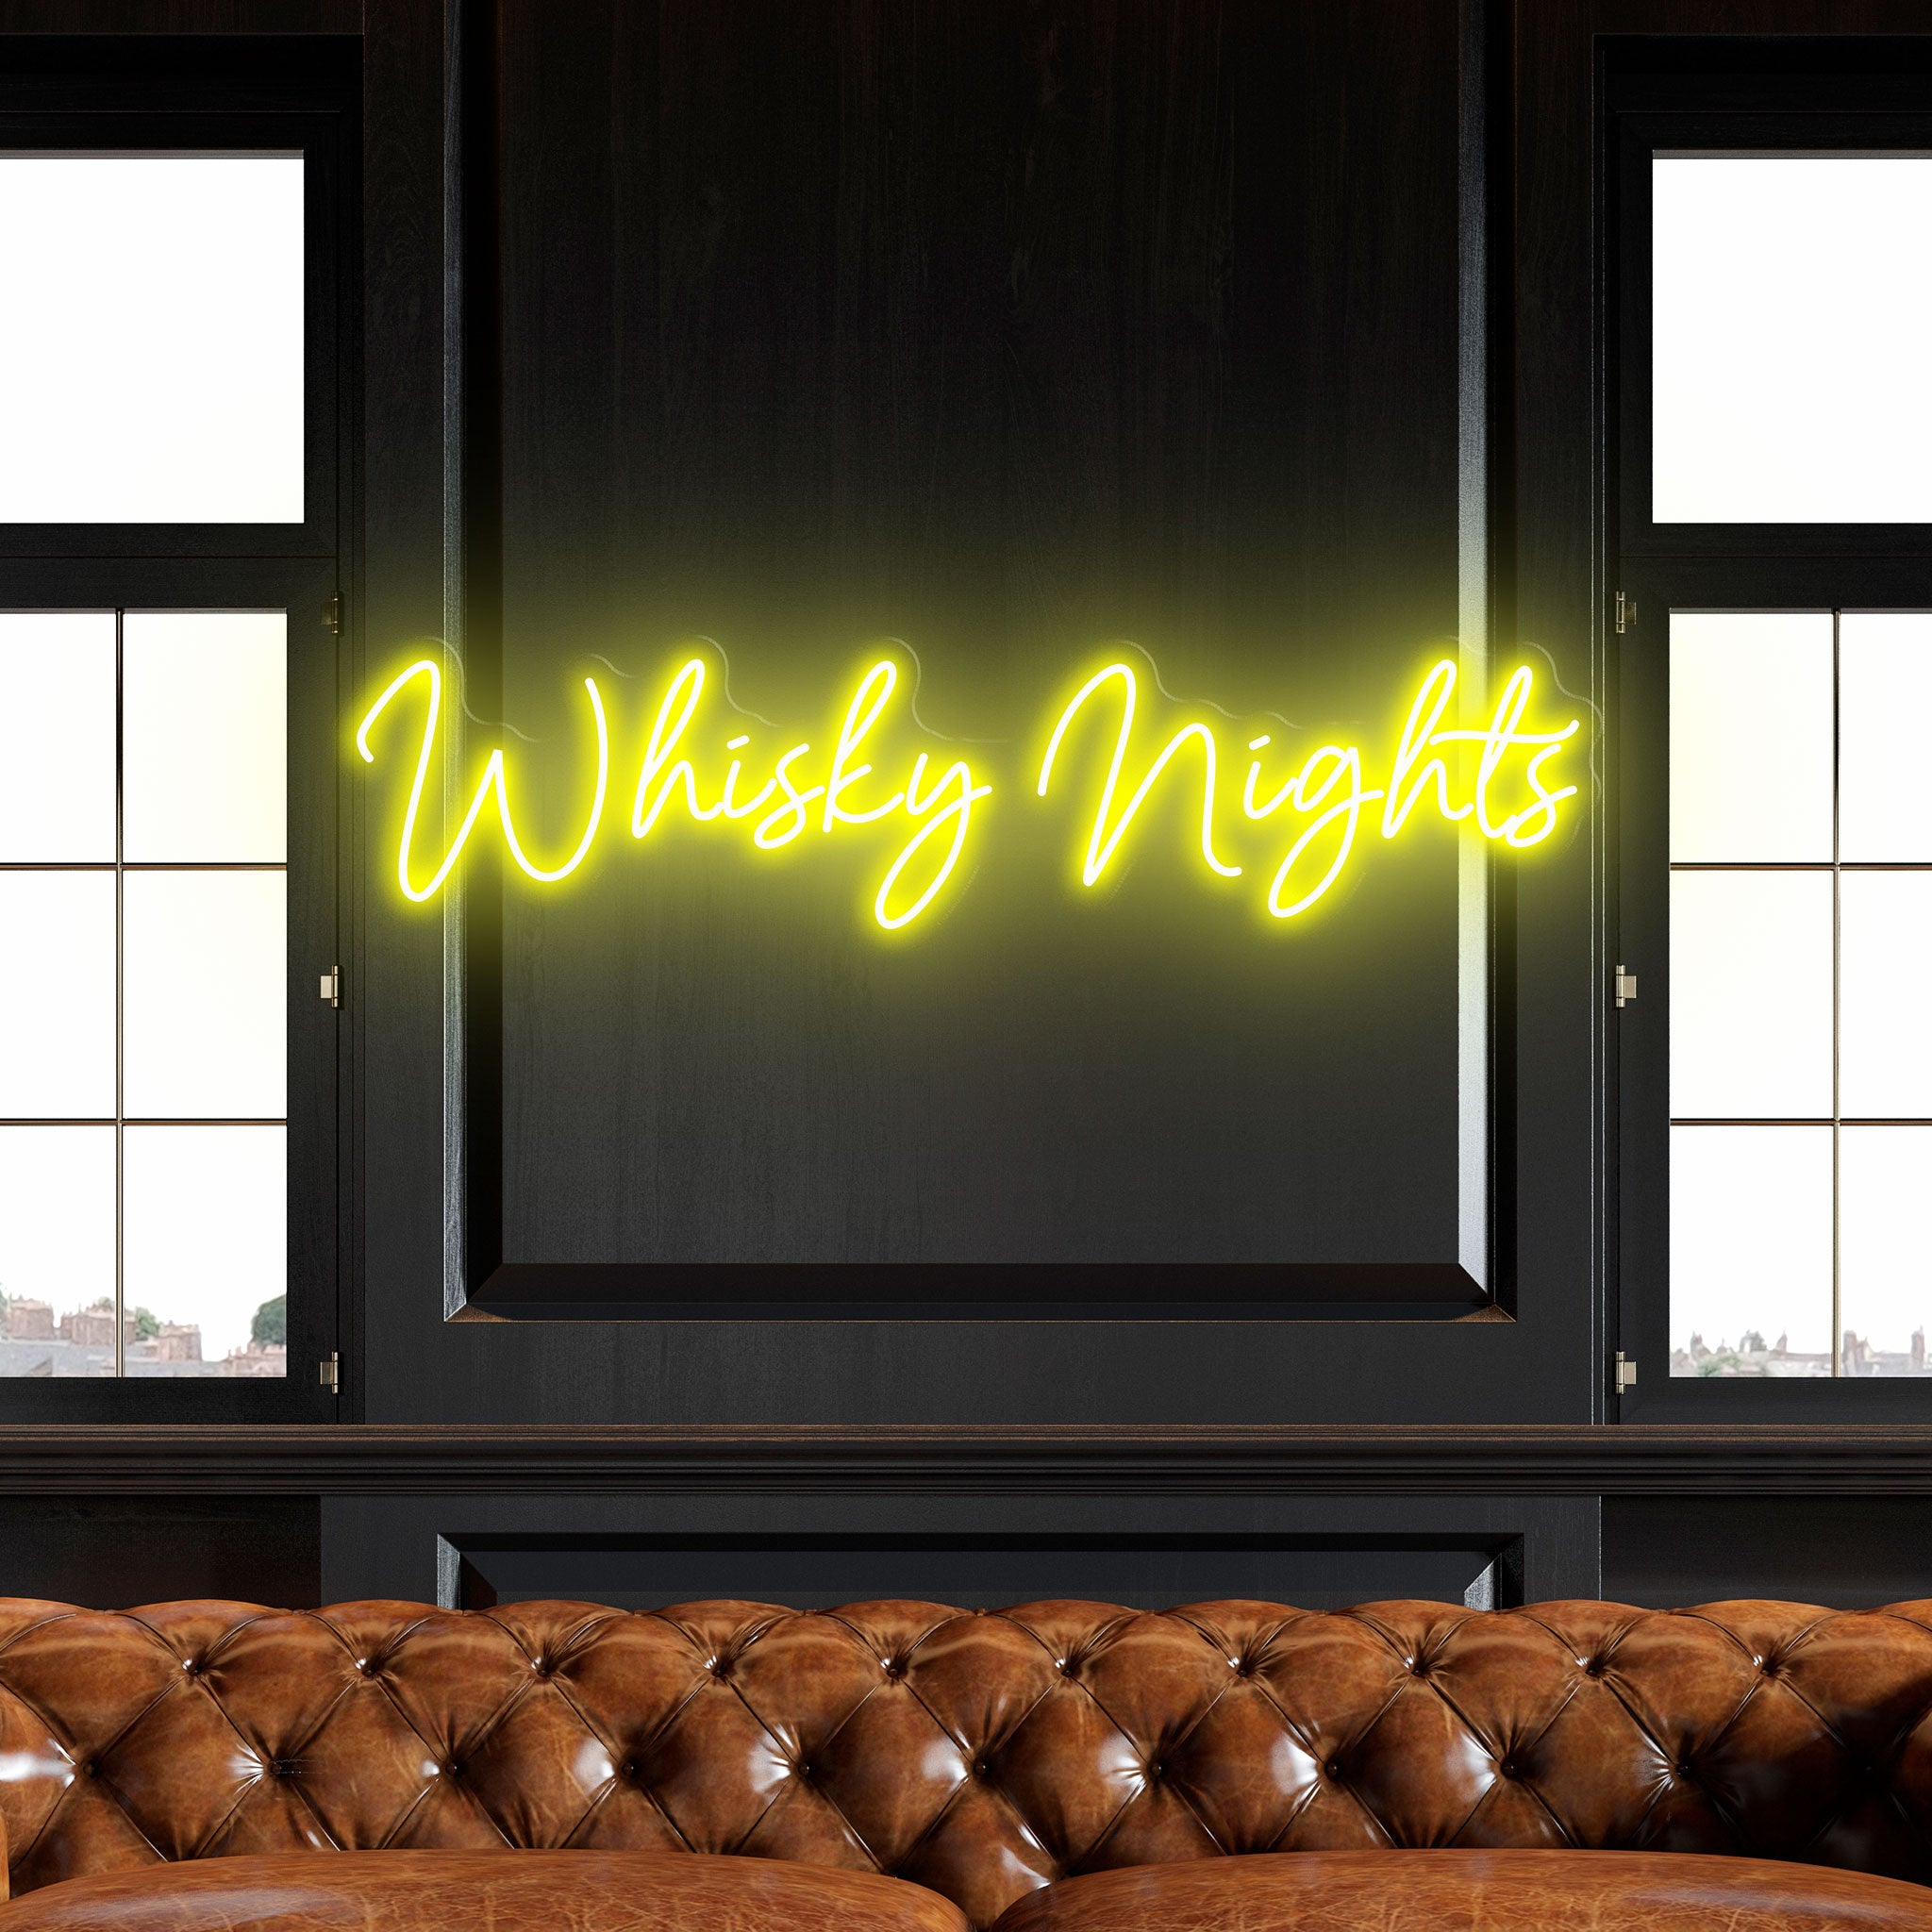 Whisky Nights - Neon Sign - Bar/Club/Party Celebration Event